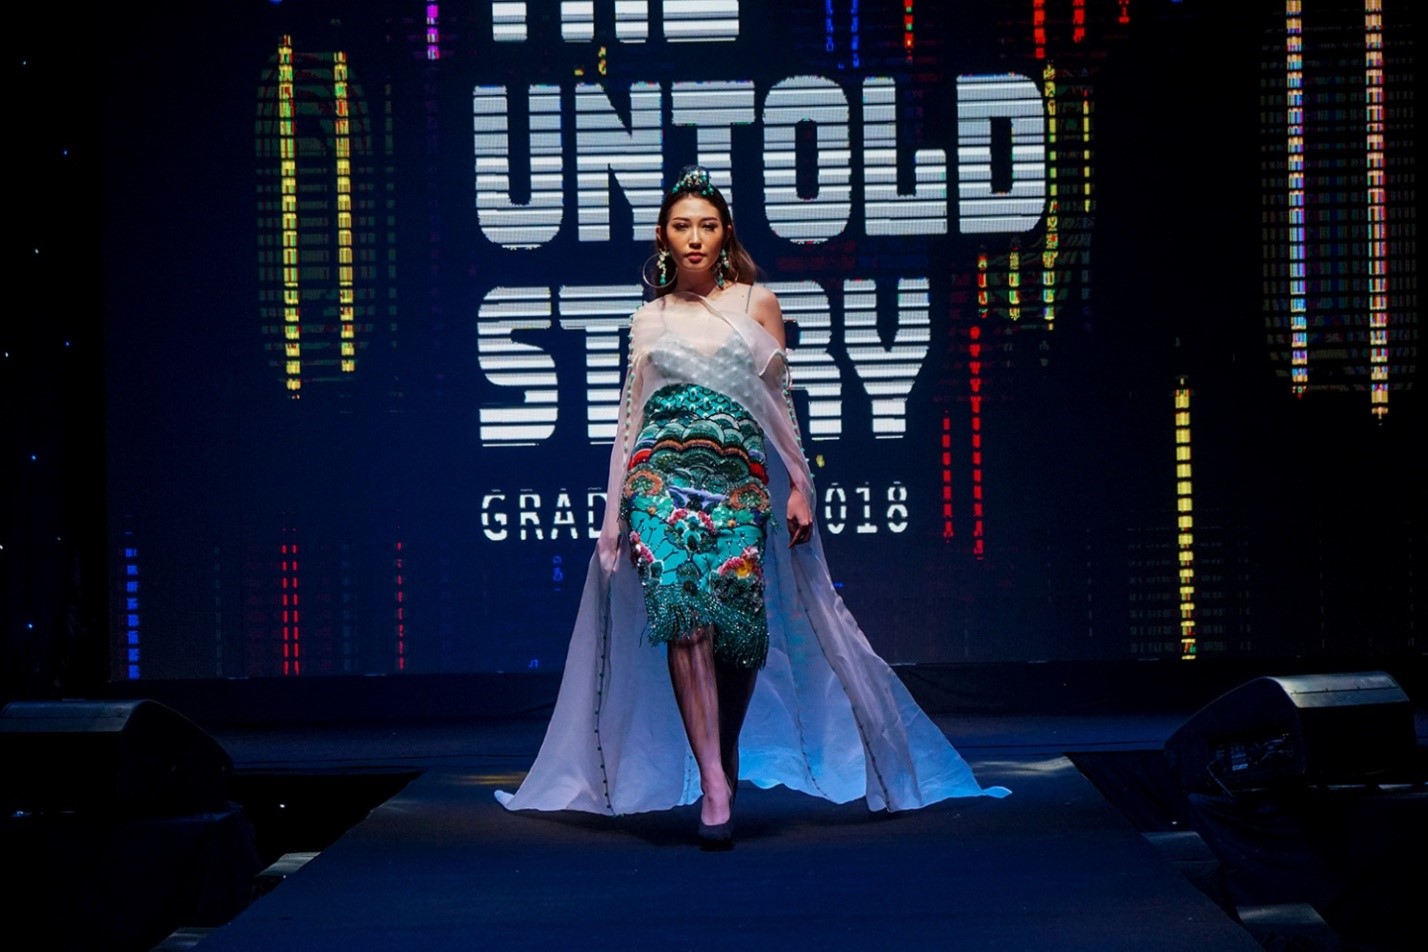 Unique fashion performance from students in the Gala